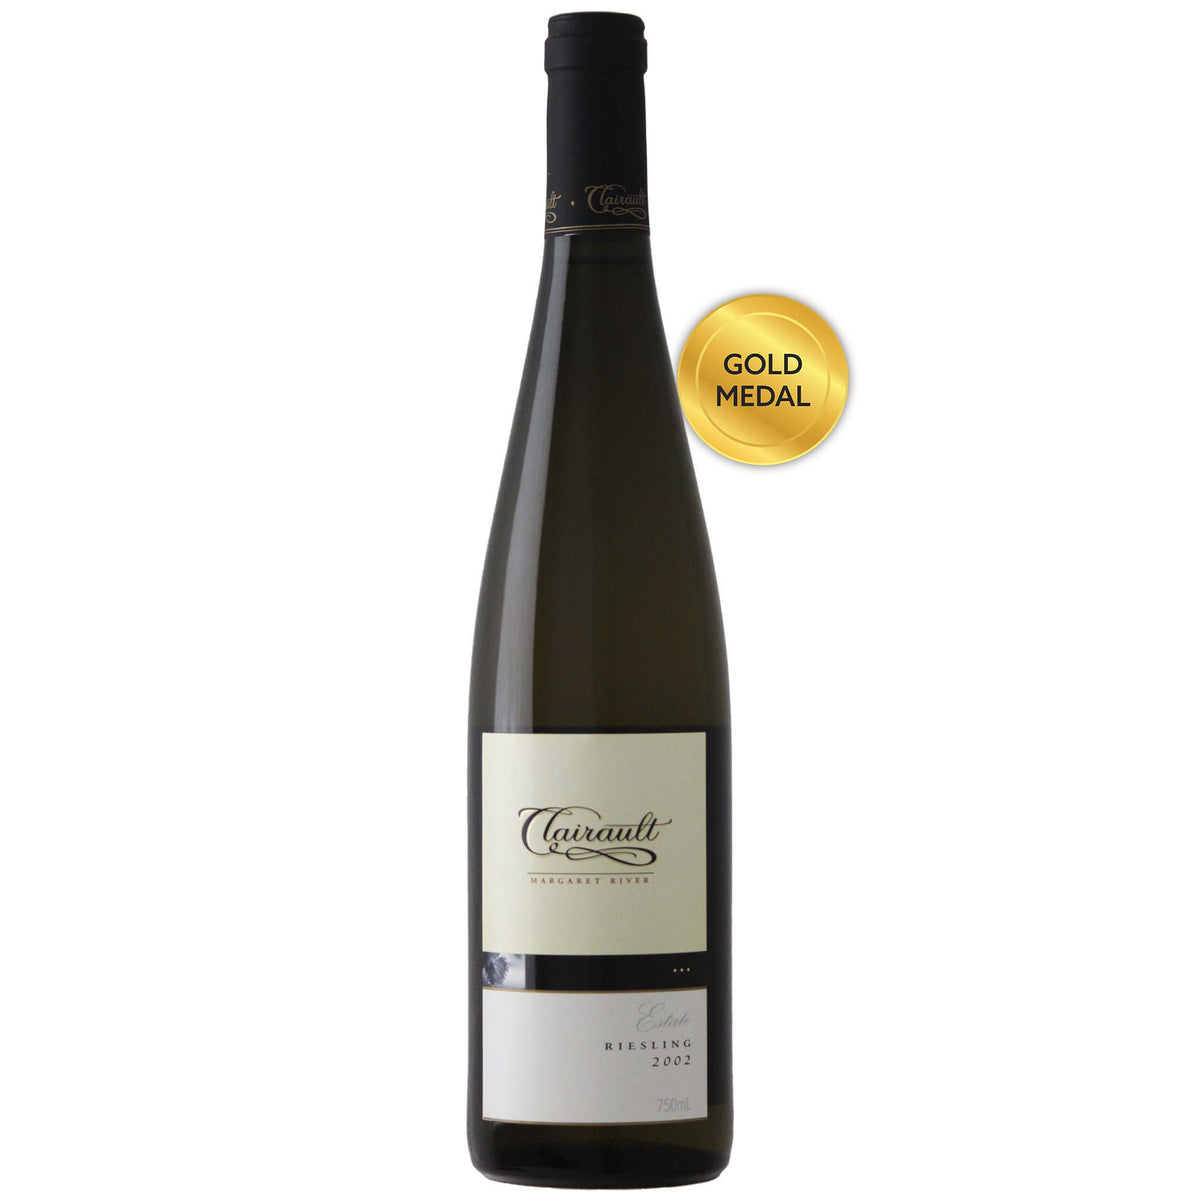 Clairault-Estate-Riesling-2002